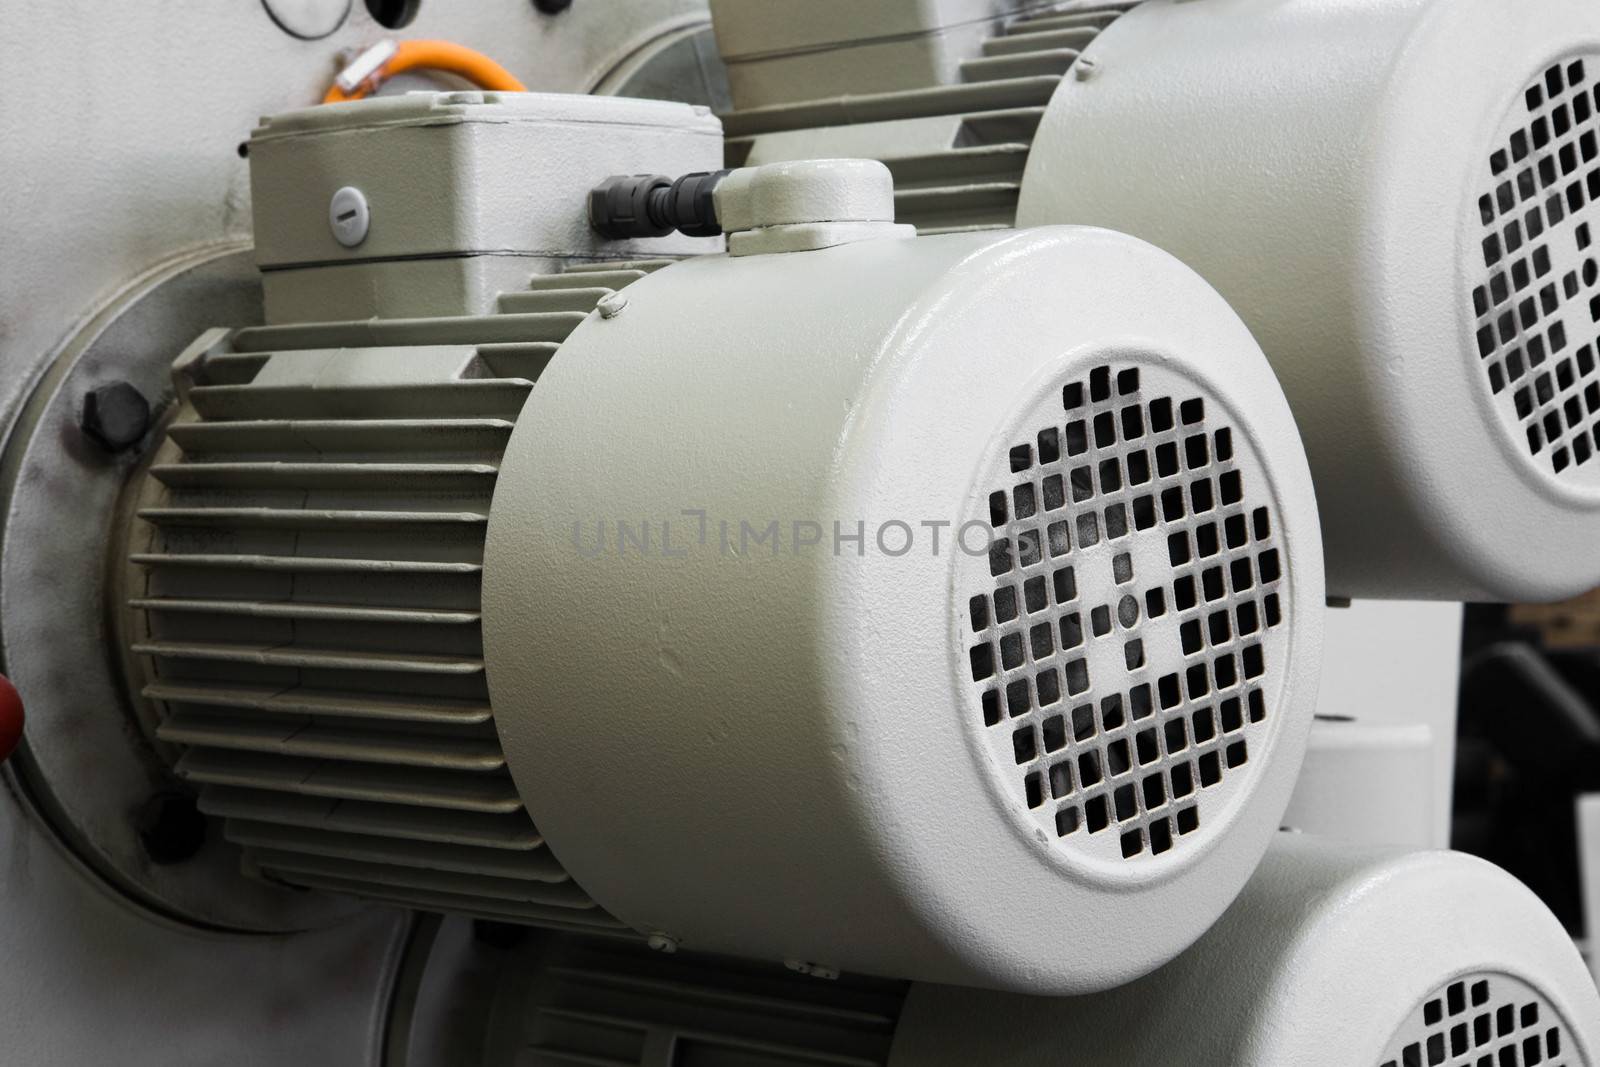 powerful electric motors for modern industrial equipment